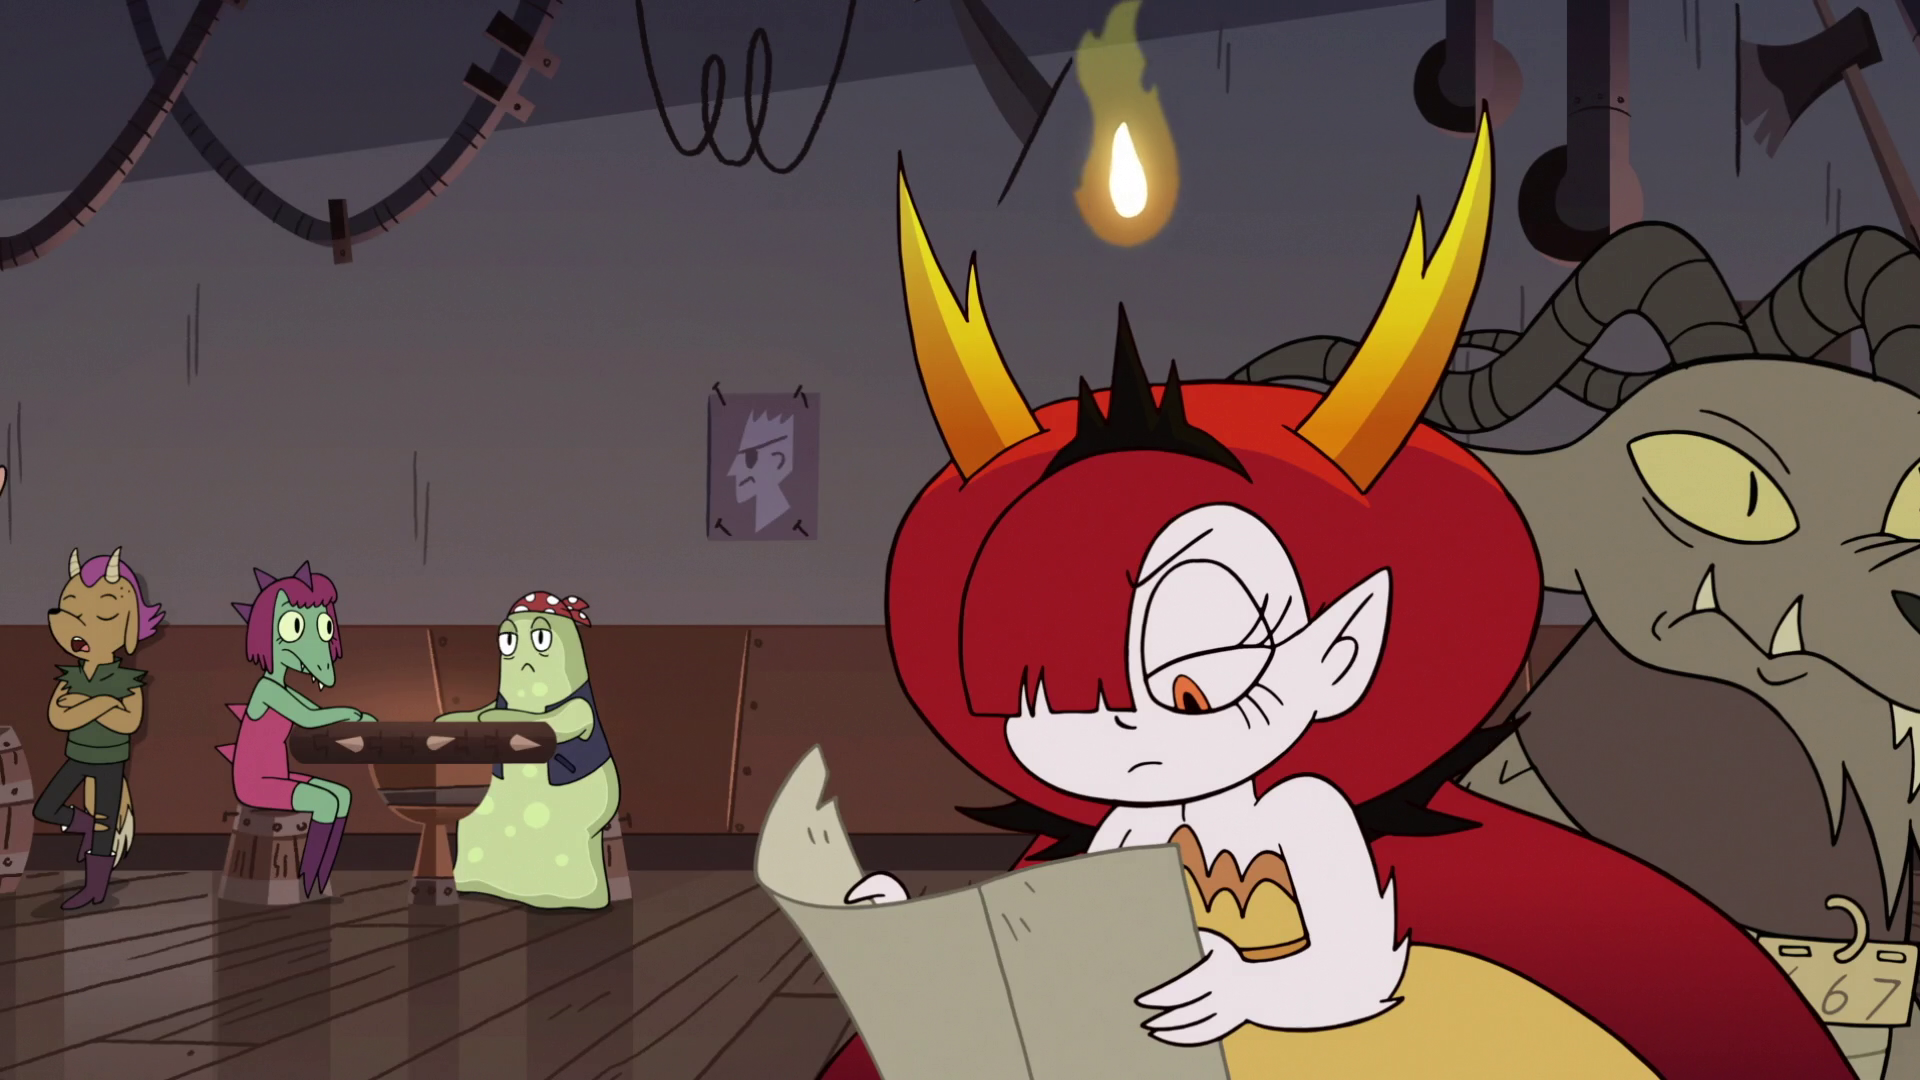 Image S3E22 Hekapoo Looking At Her Portal Mappng Star Vs The